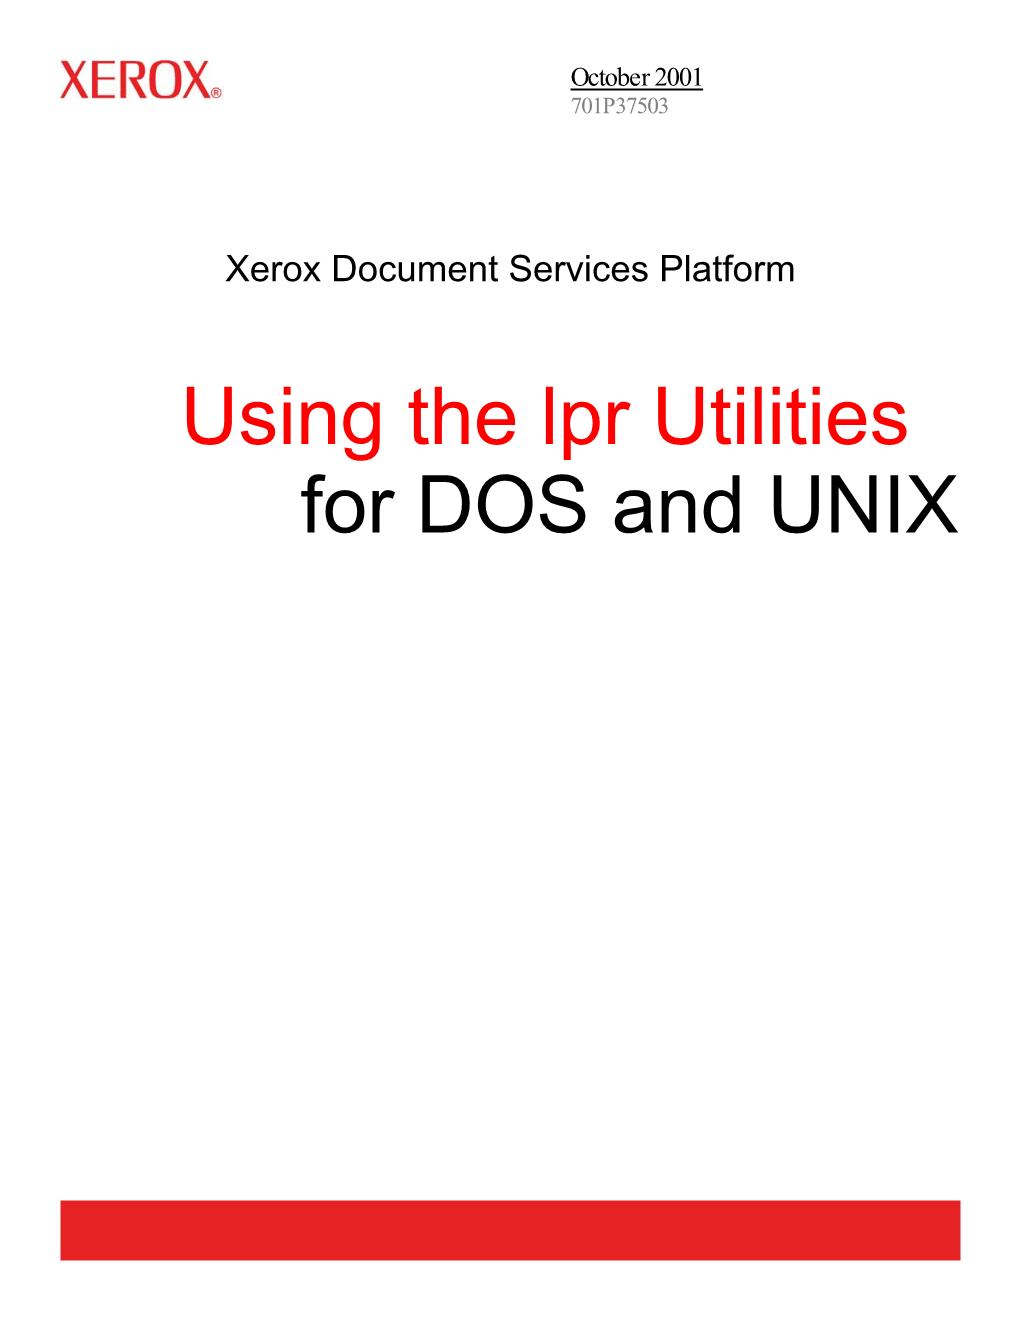 Using the Lpr Utilities for DOS and UNIX